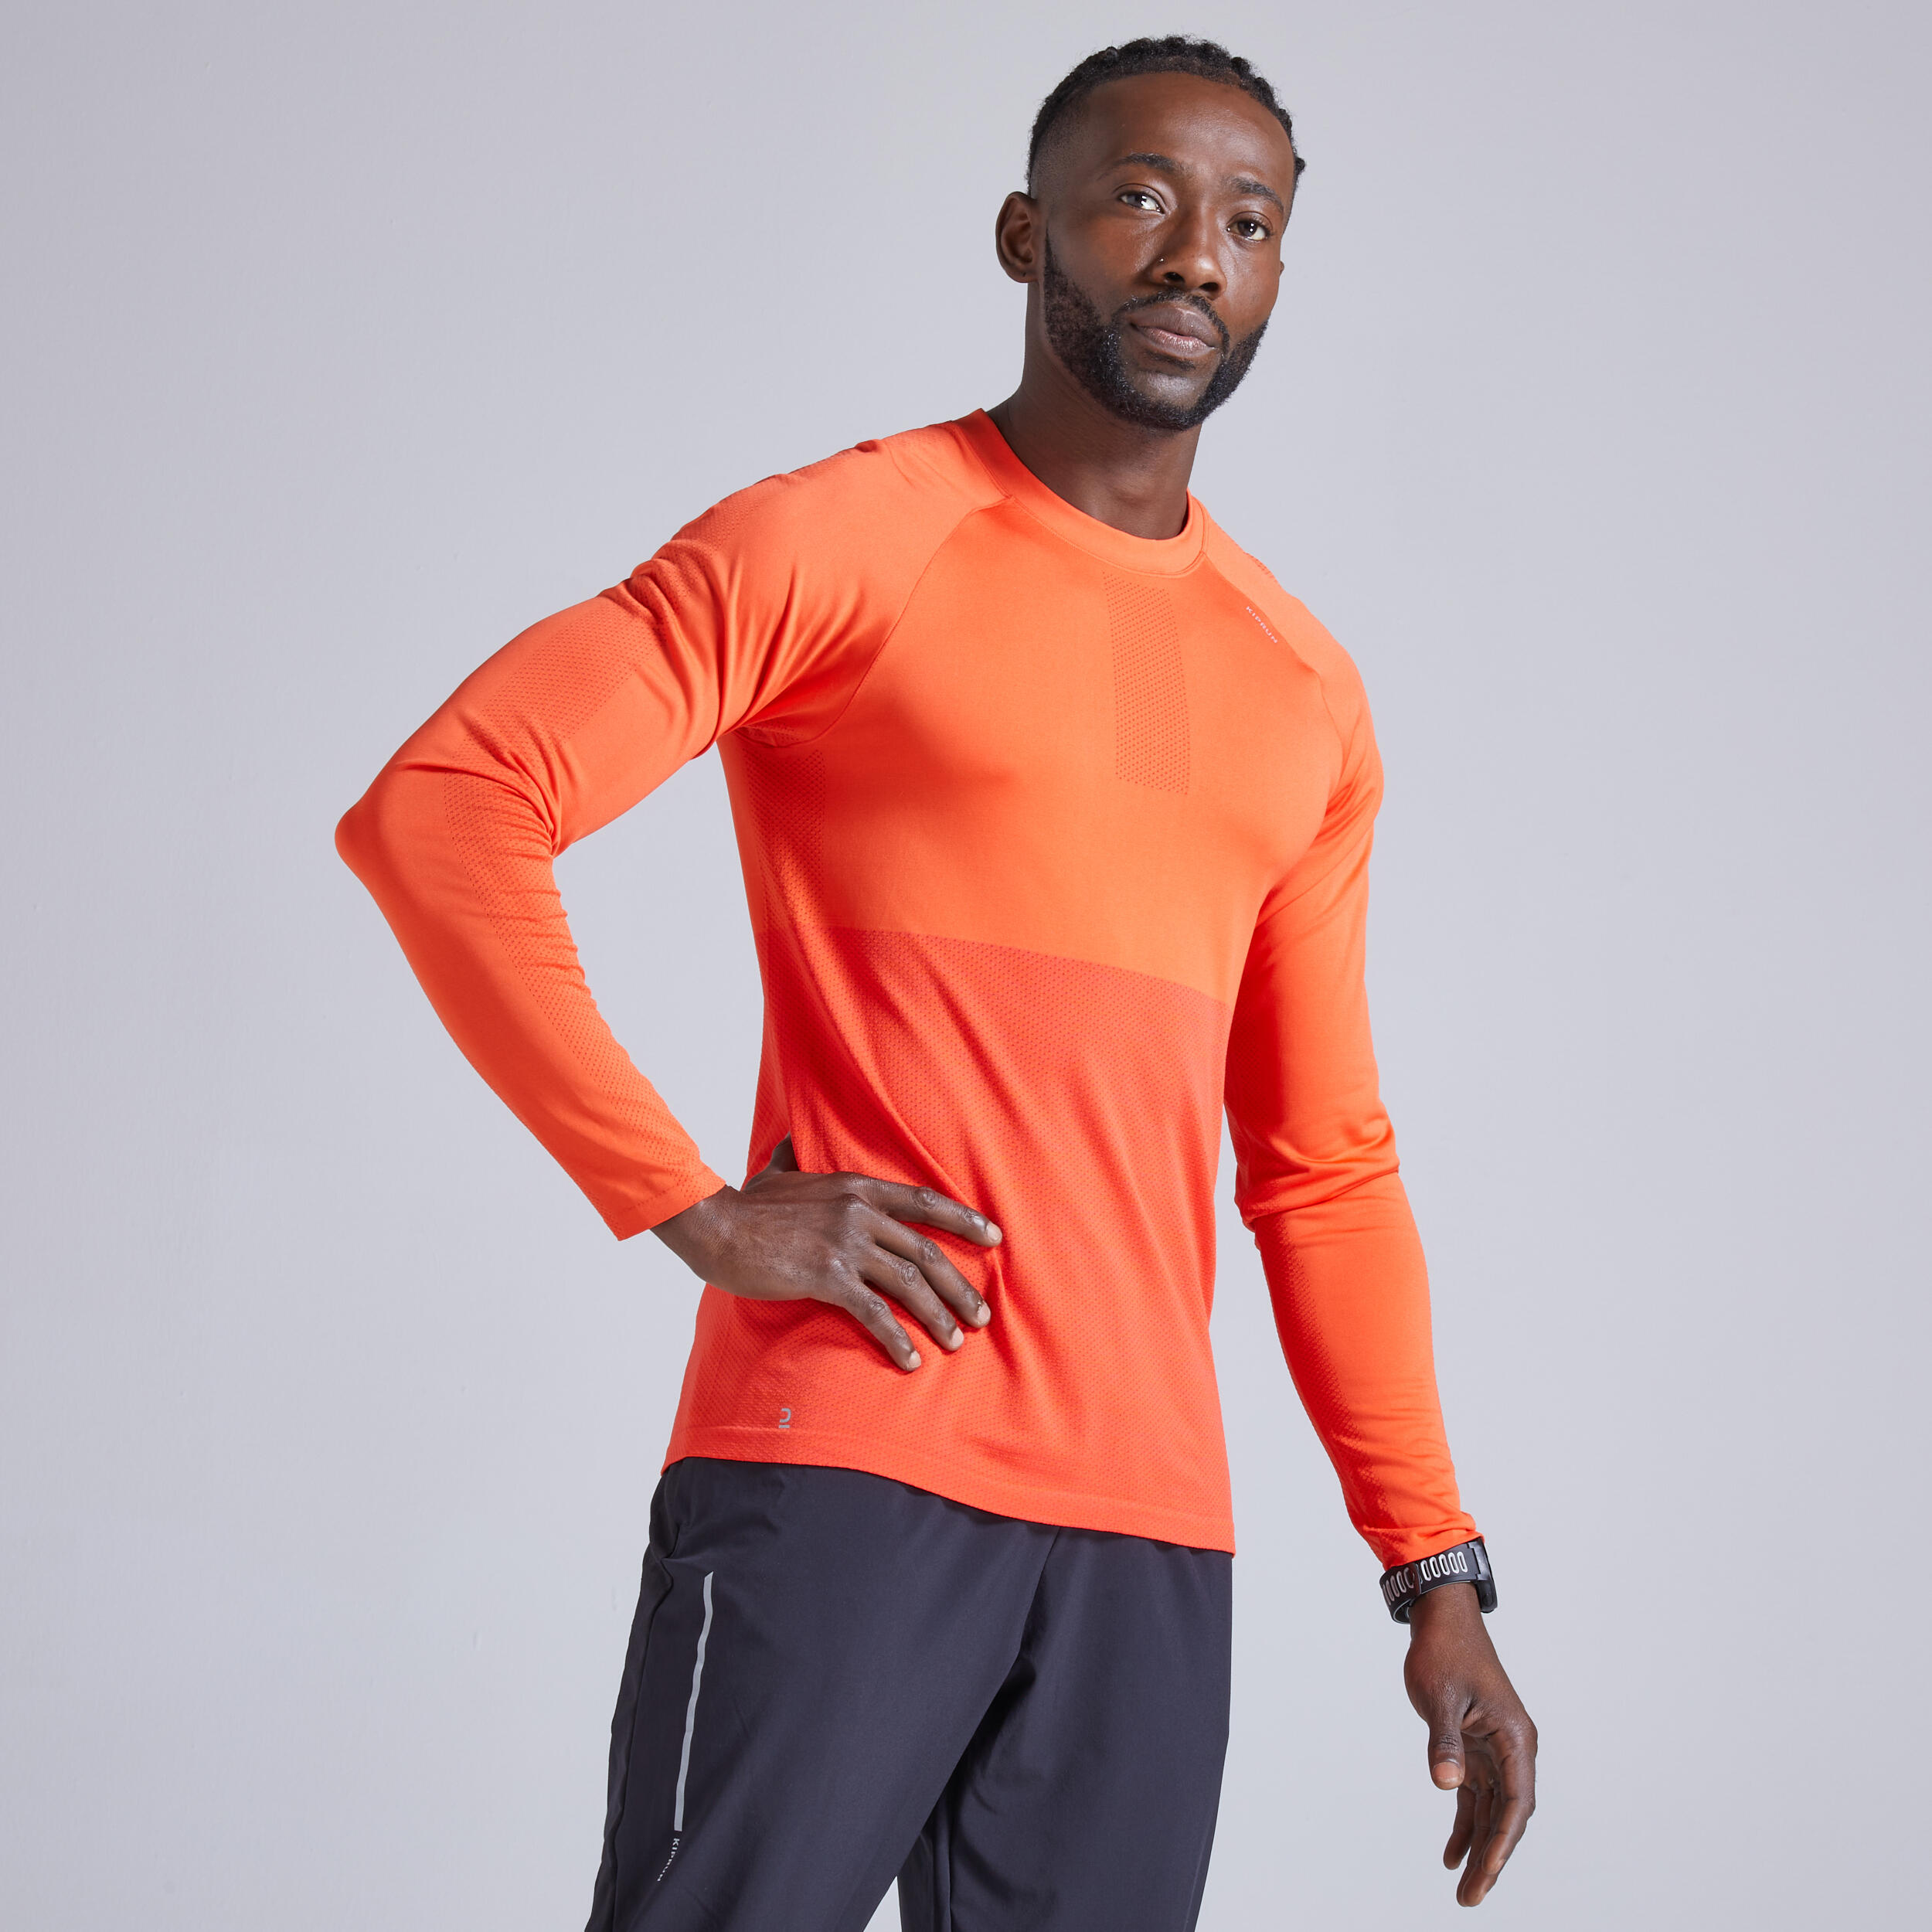 T-SHIRT RUNNING HOMME RESPIRANT MANCHE LONGUE CARE  EDITION LIMITEE 3/11